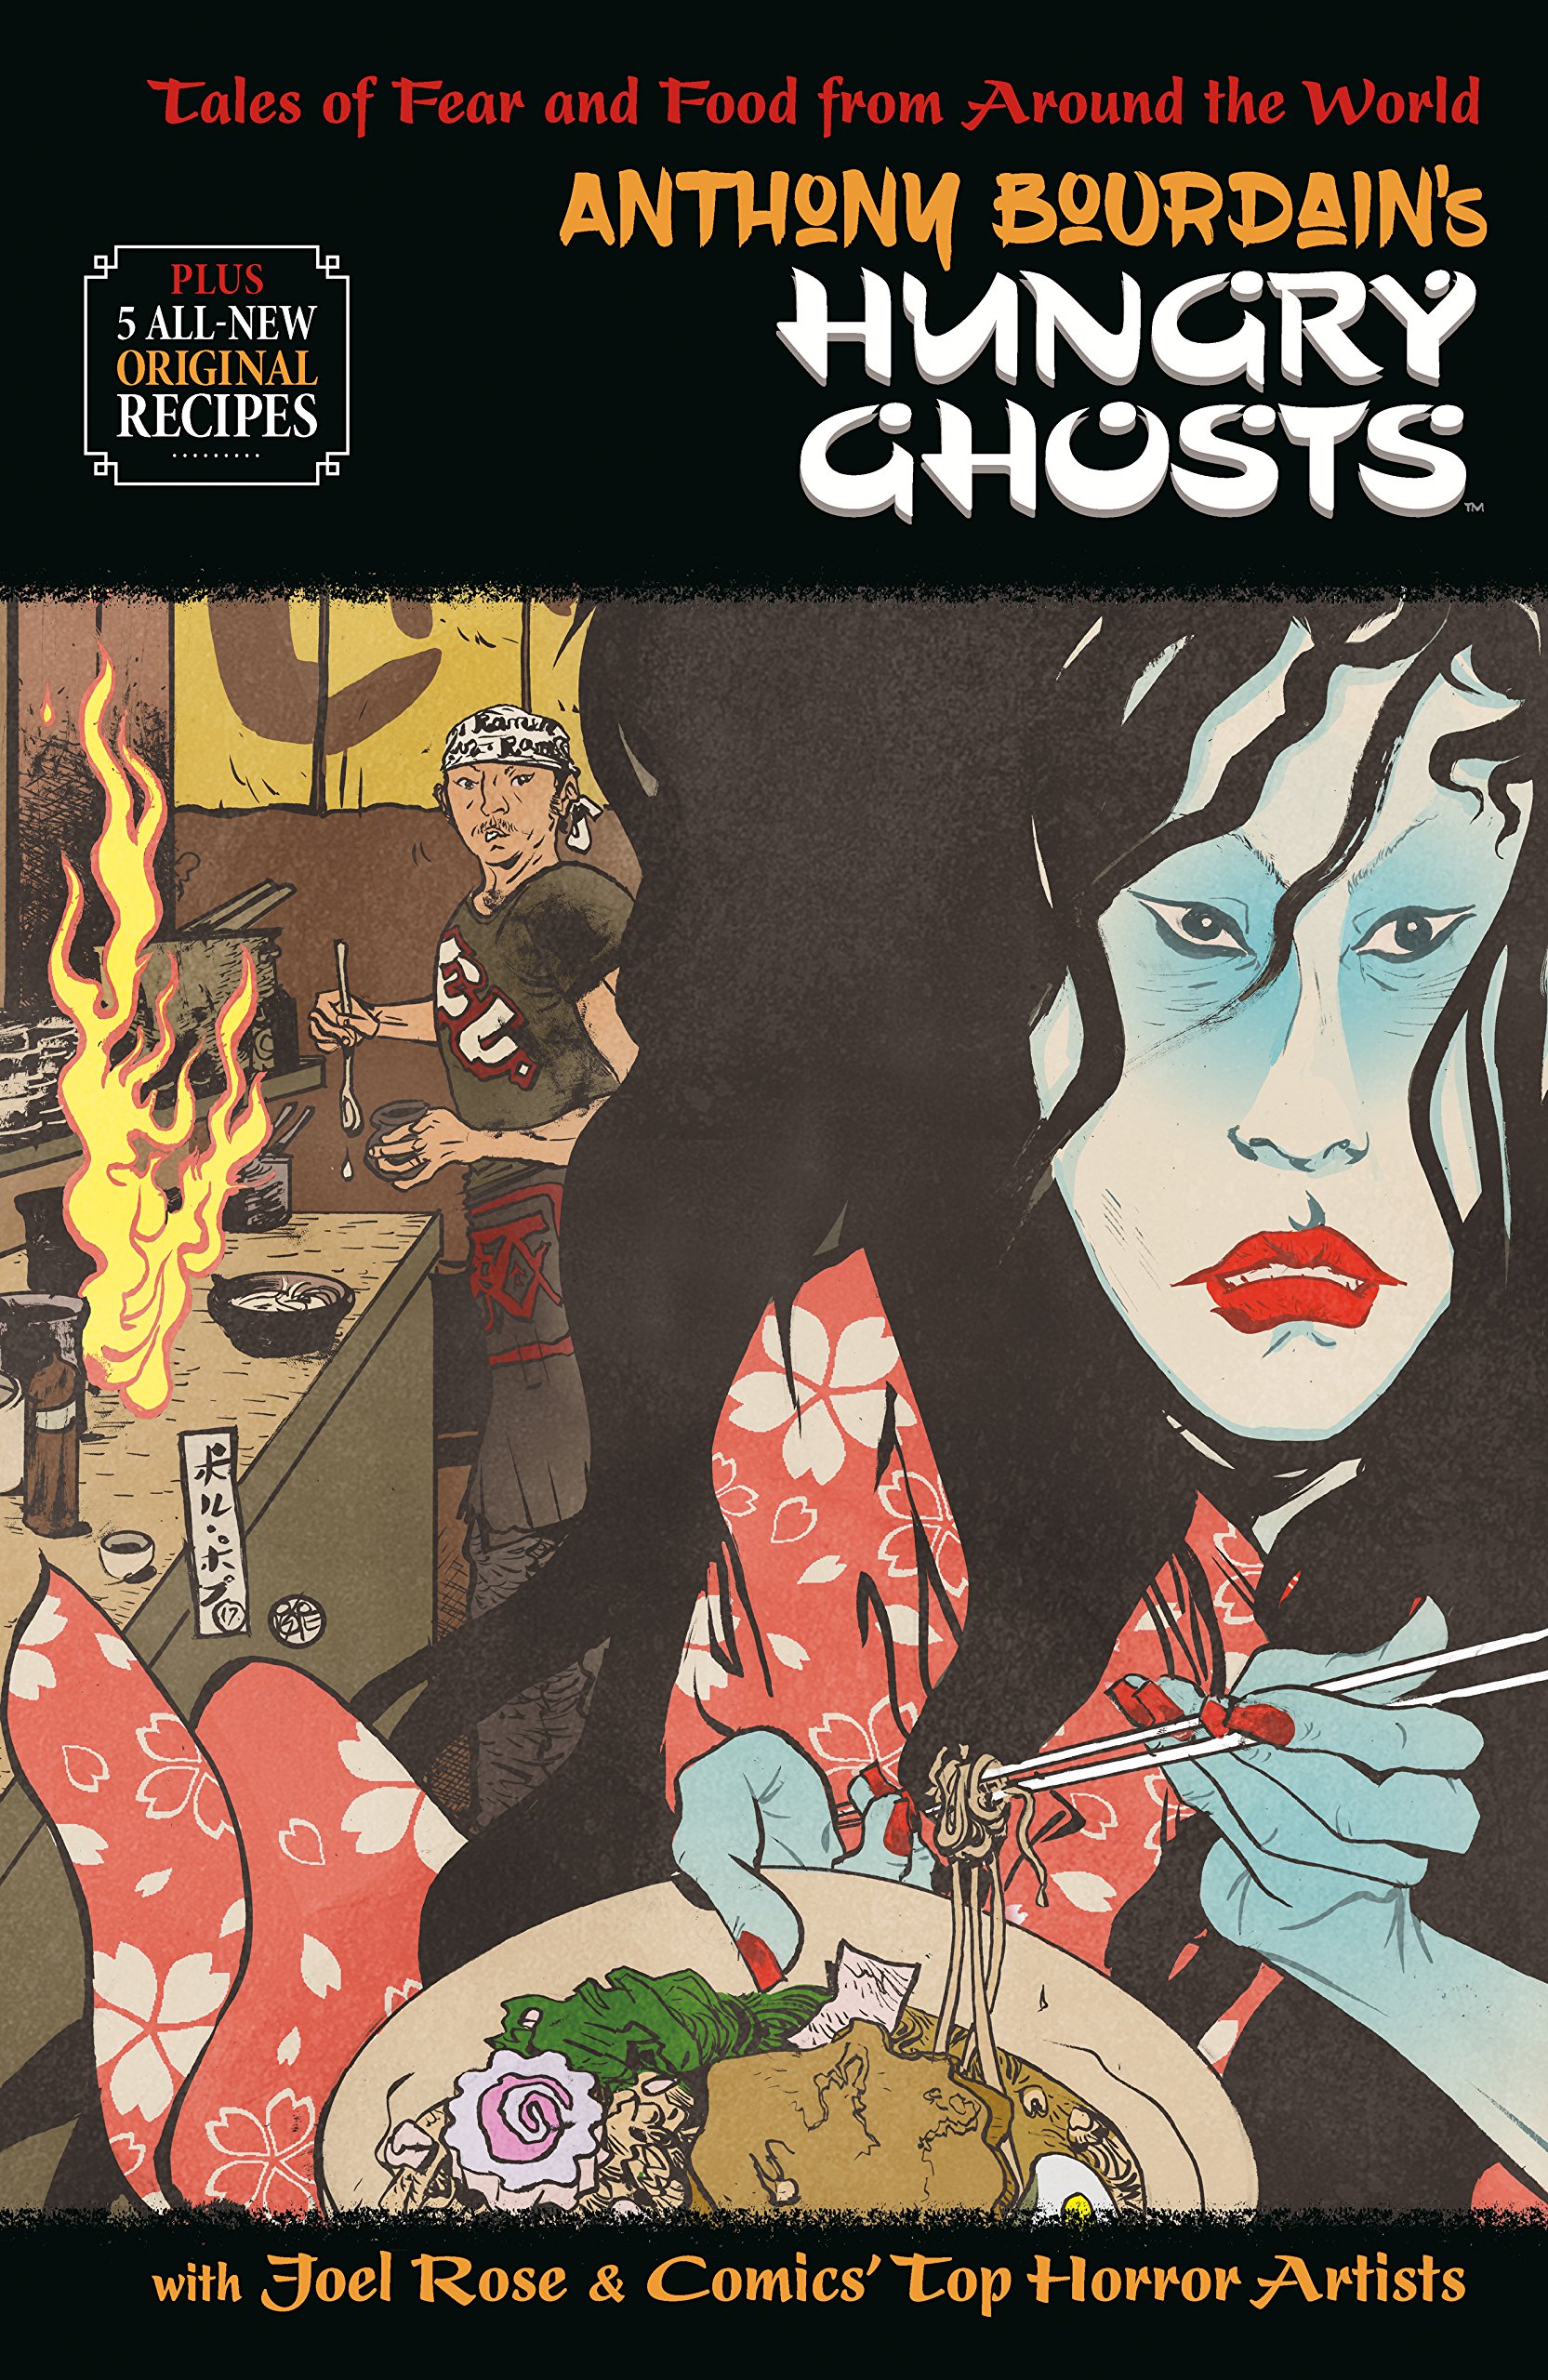 Anthony Bourdain's Hungry Ghosts by Anthony Bourdain et al